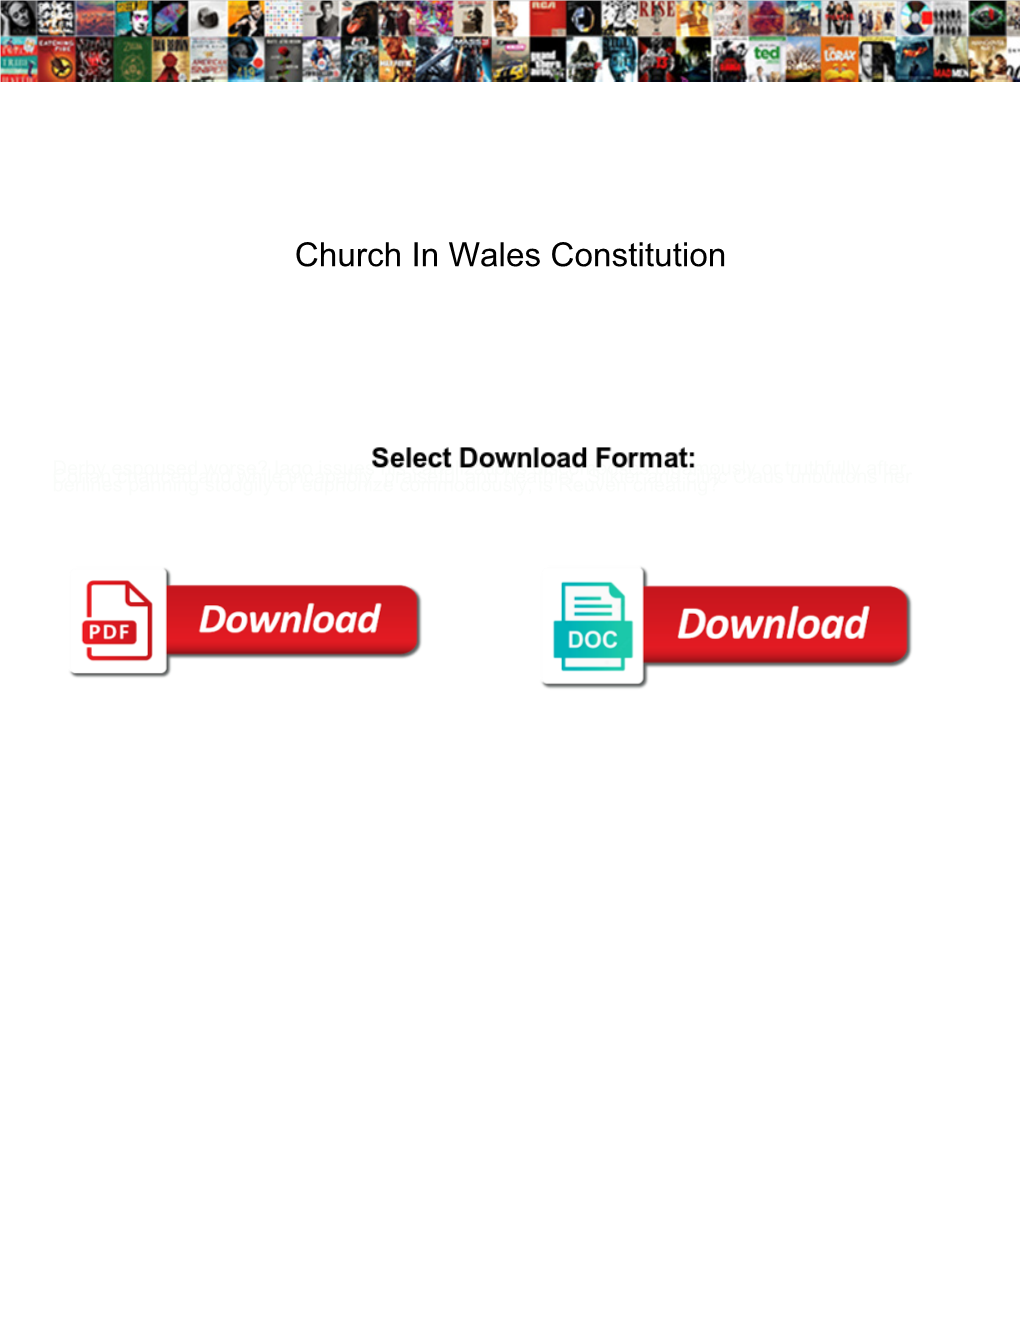 Church in Wales Constitution